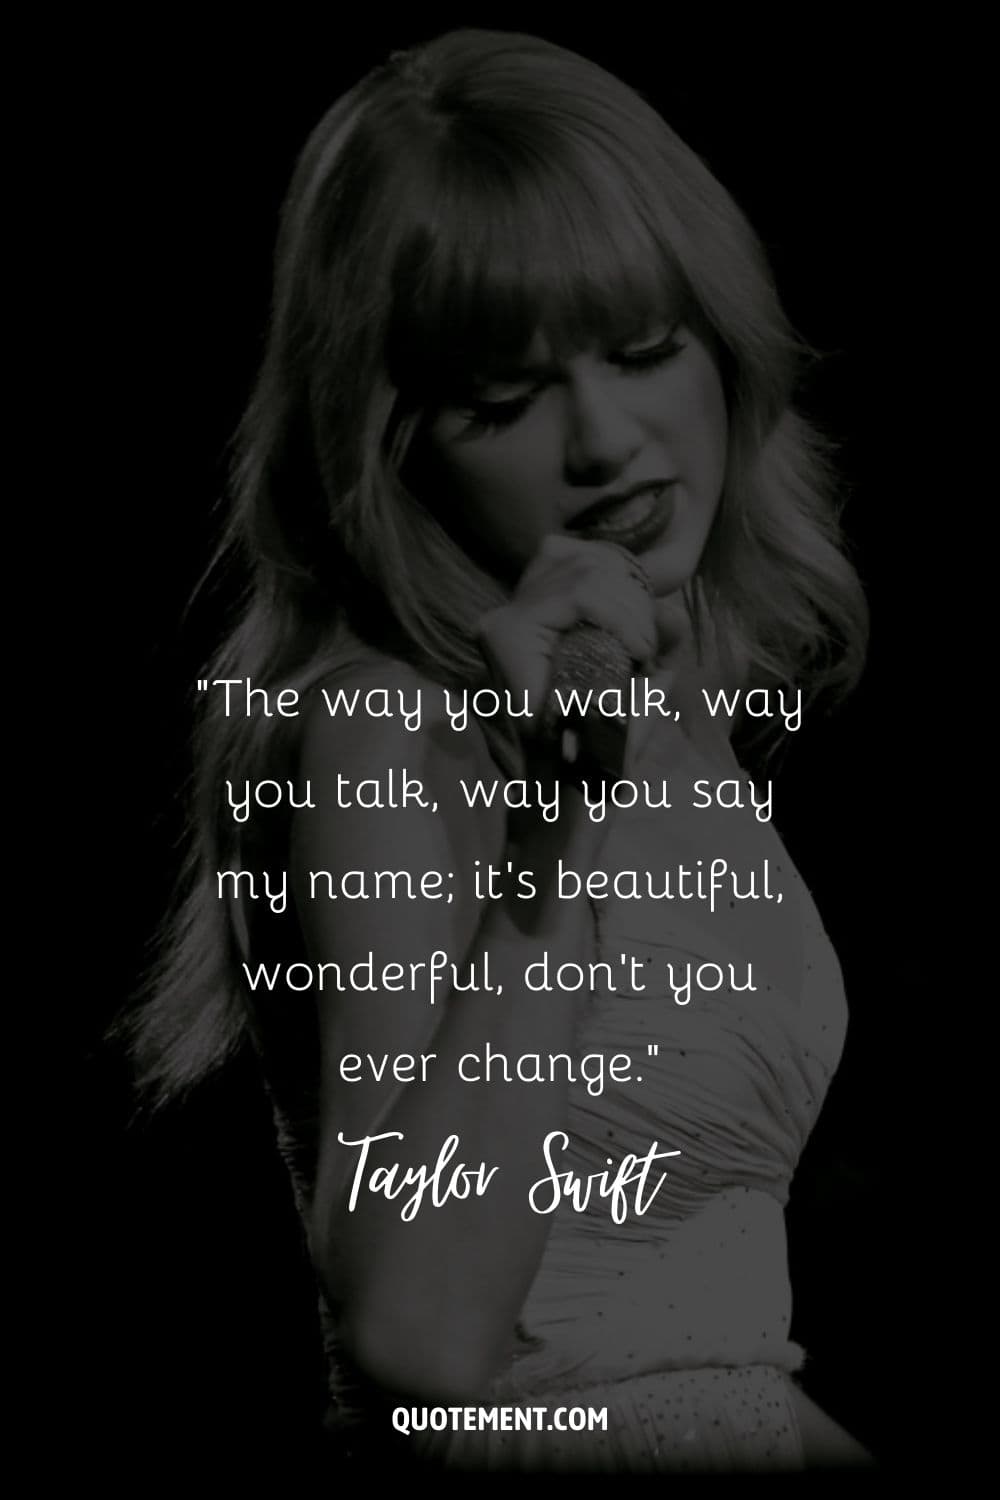 “The way you walk, way you talk, way you say my name; it's beautiful, wonderful, don't you ever change.” ― Taylor Swift